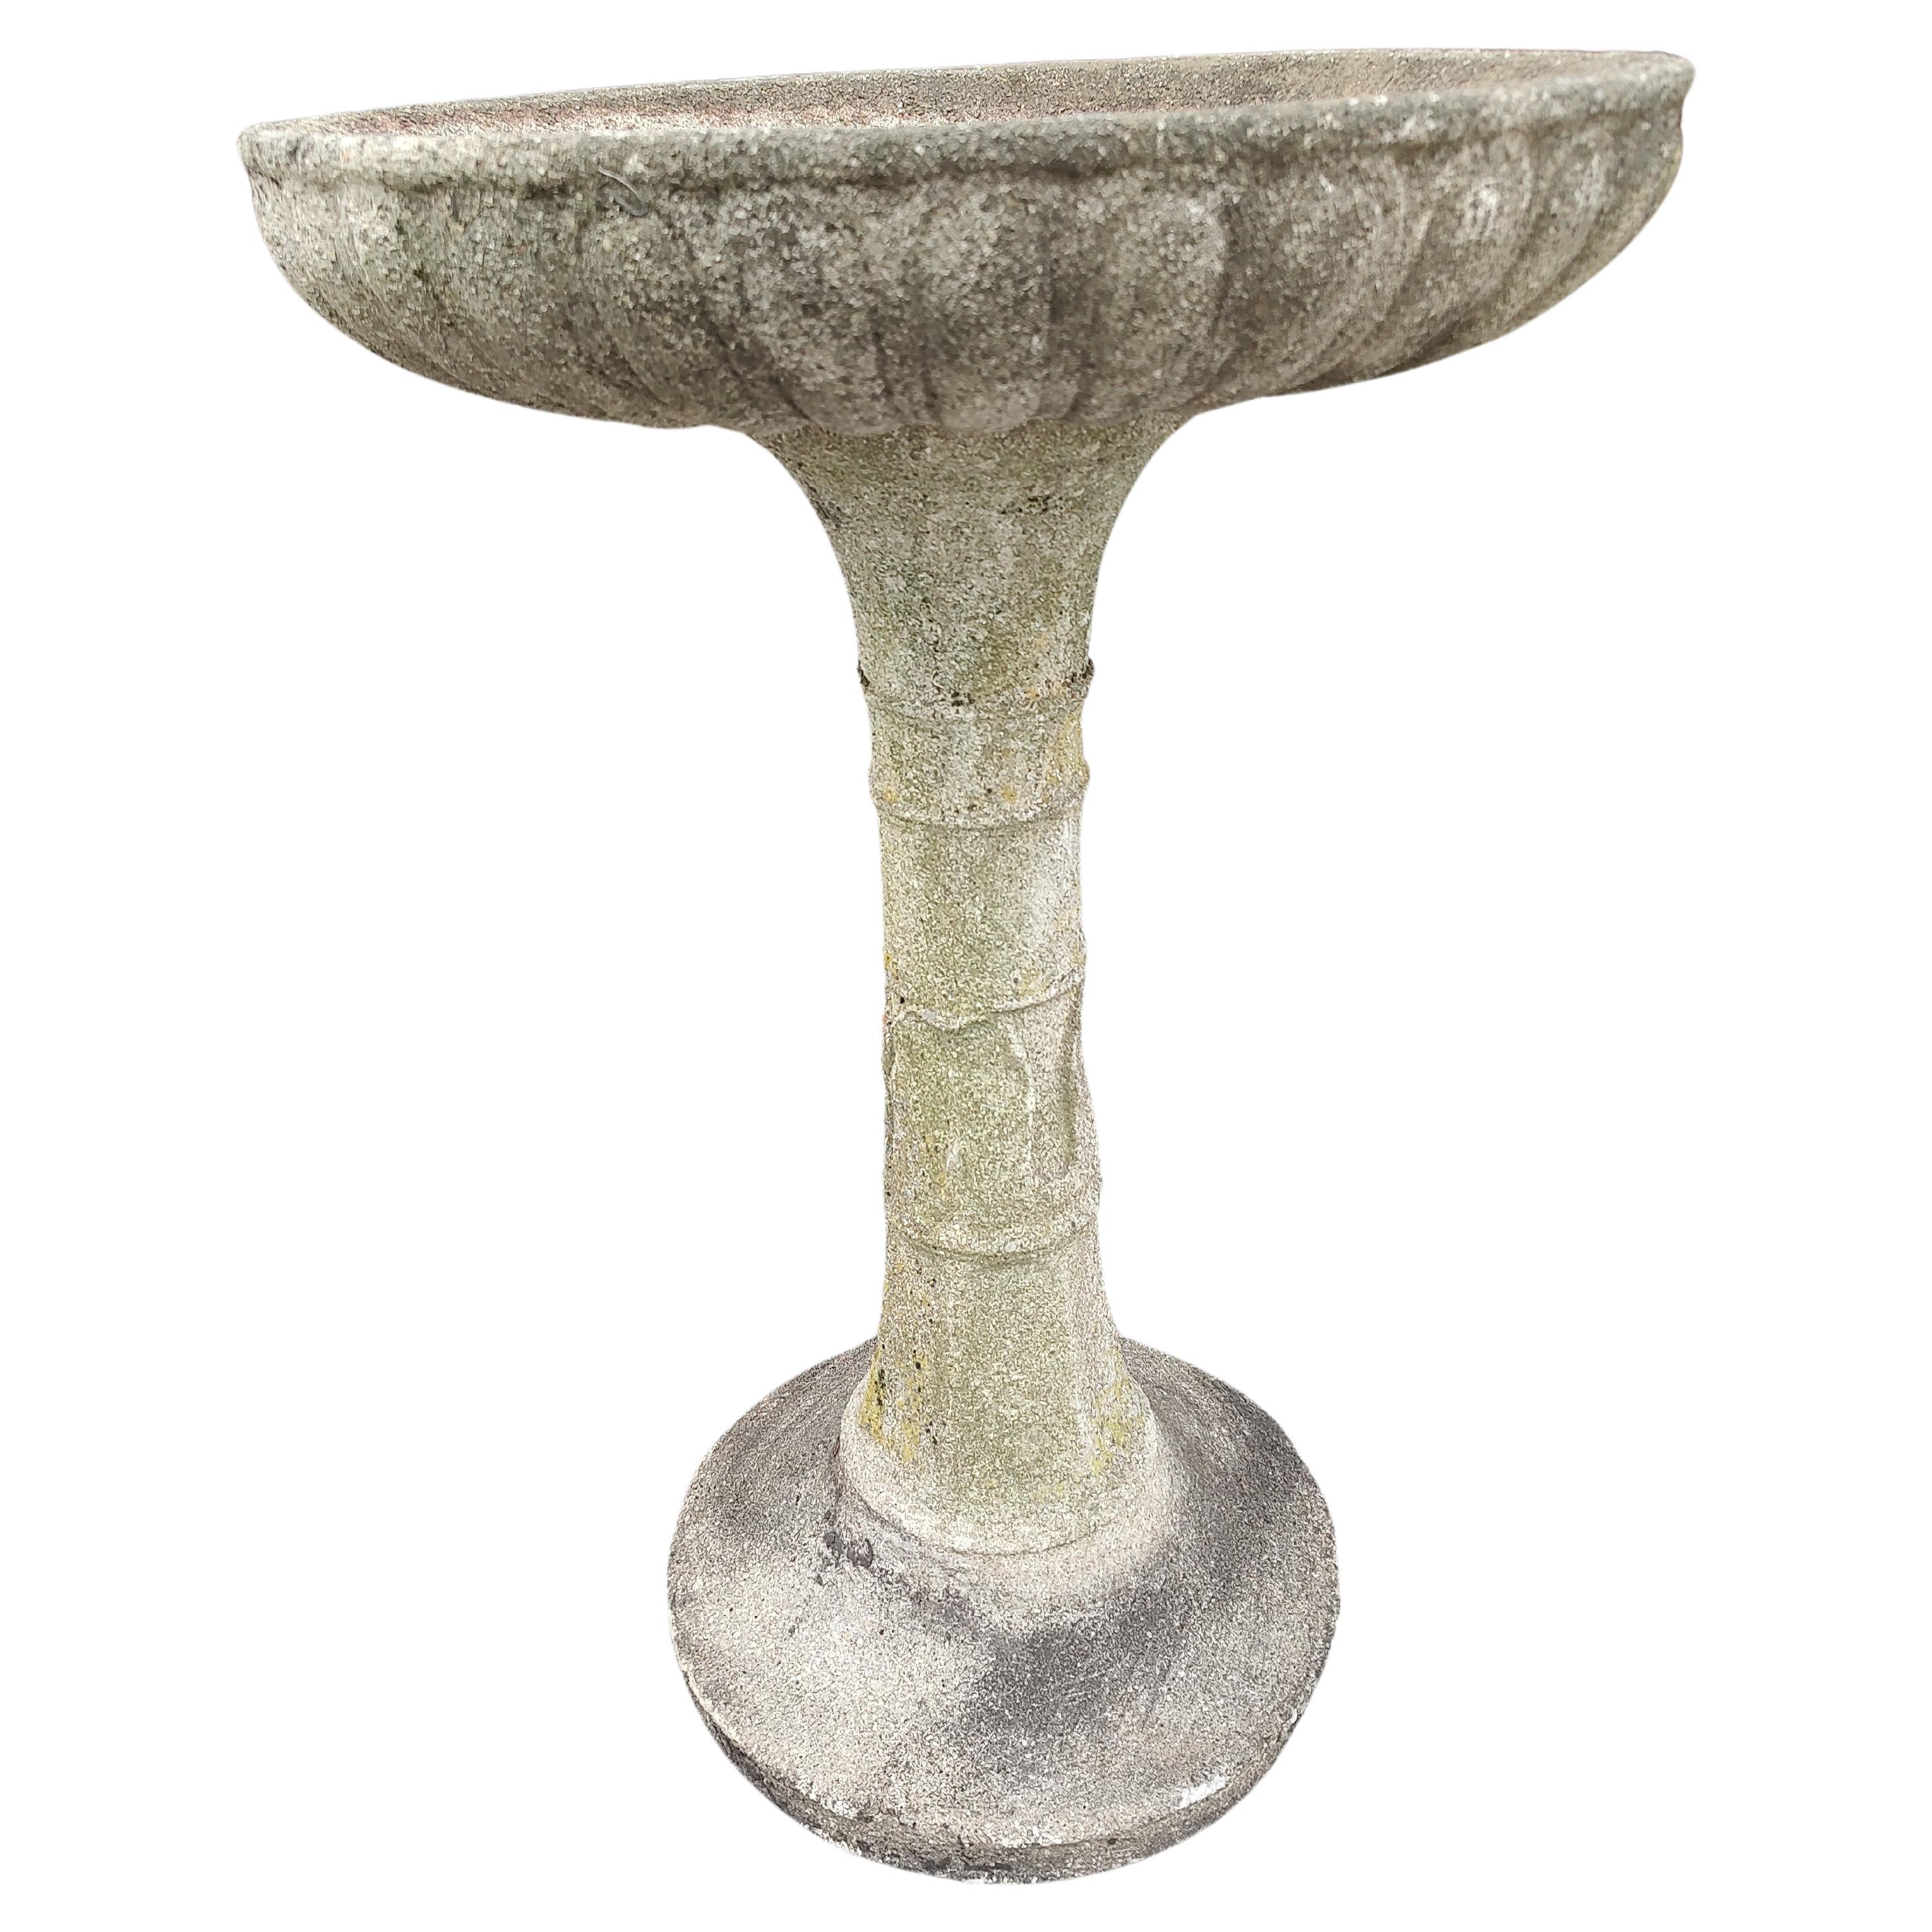 Beautiful 2 piece cast stone birdbath wit a magnificent patina. Minor crack in the basin which we are going to silicone. Holds water. Other than that it's in excellent condition with age related wear.